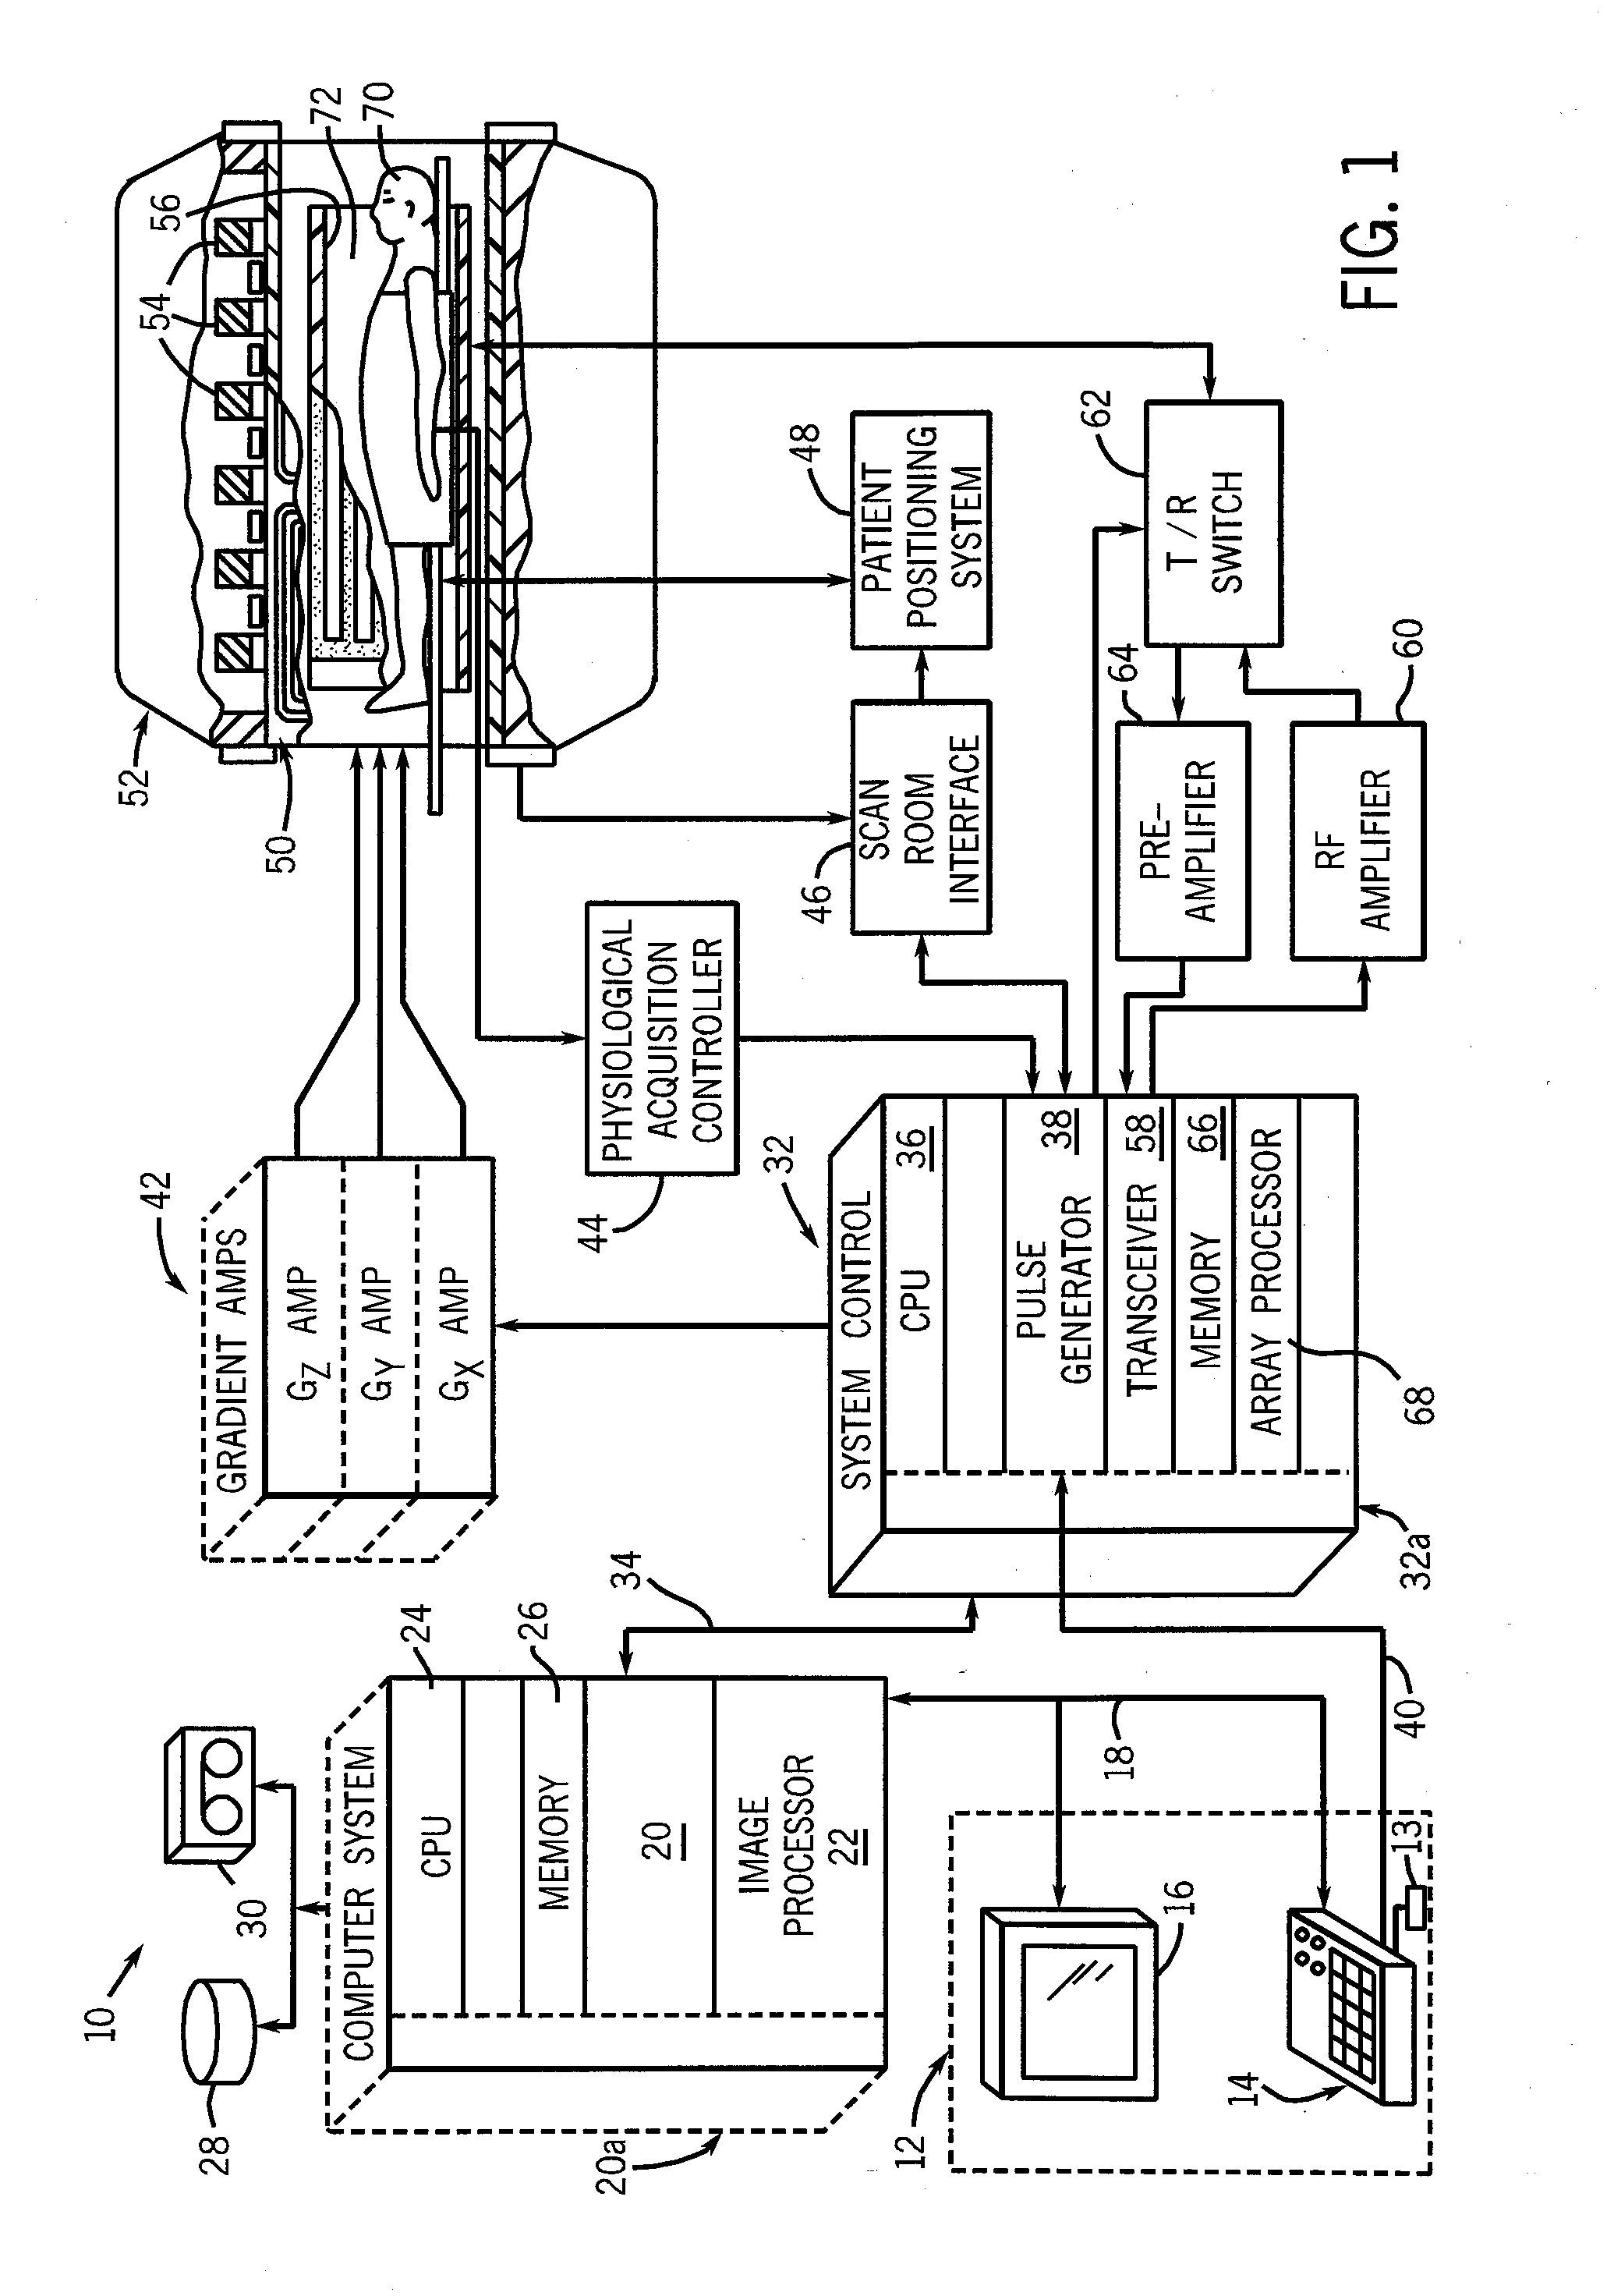 Method and apparatus for acquiring magnetic resonance imaging data